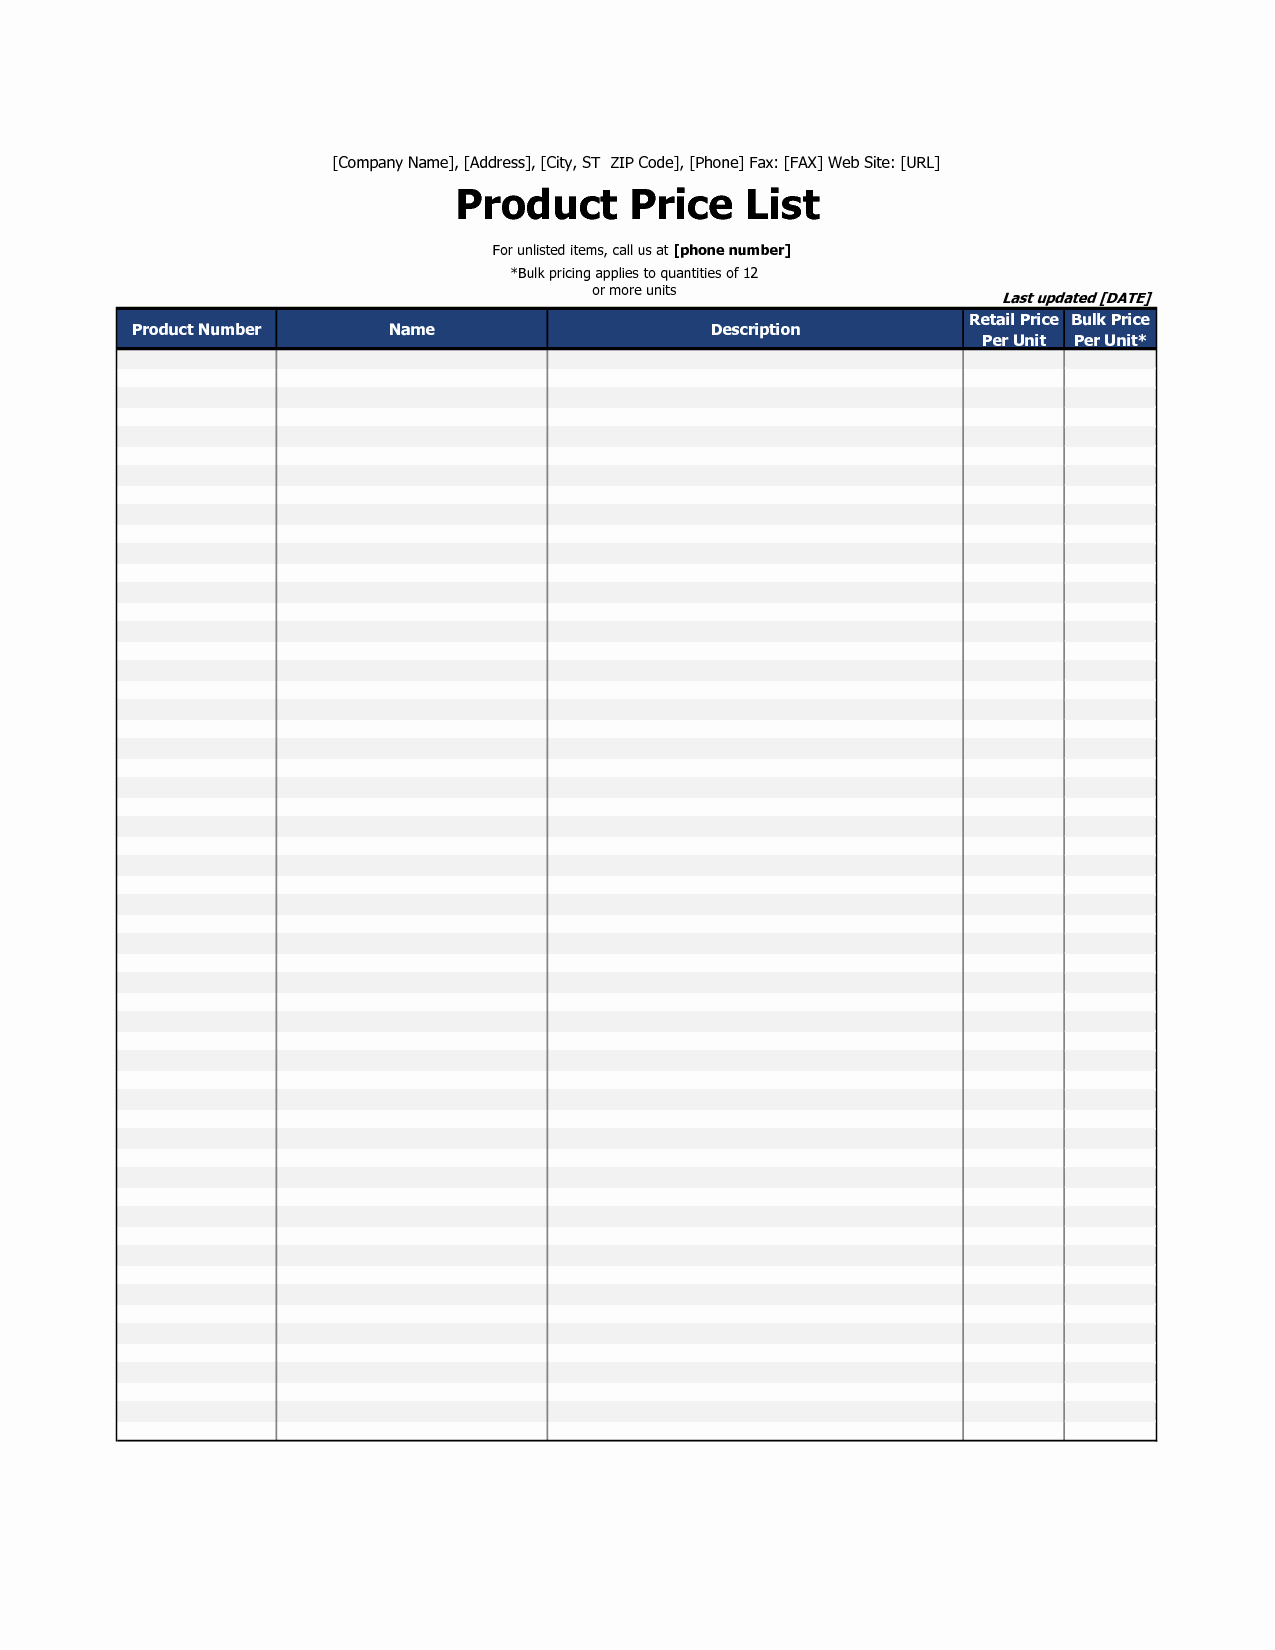 Excel Price Sheet Template Beautiful Excel Price List Template Portablegasgrillweber